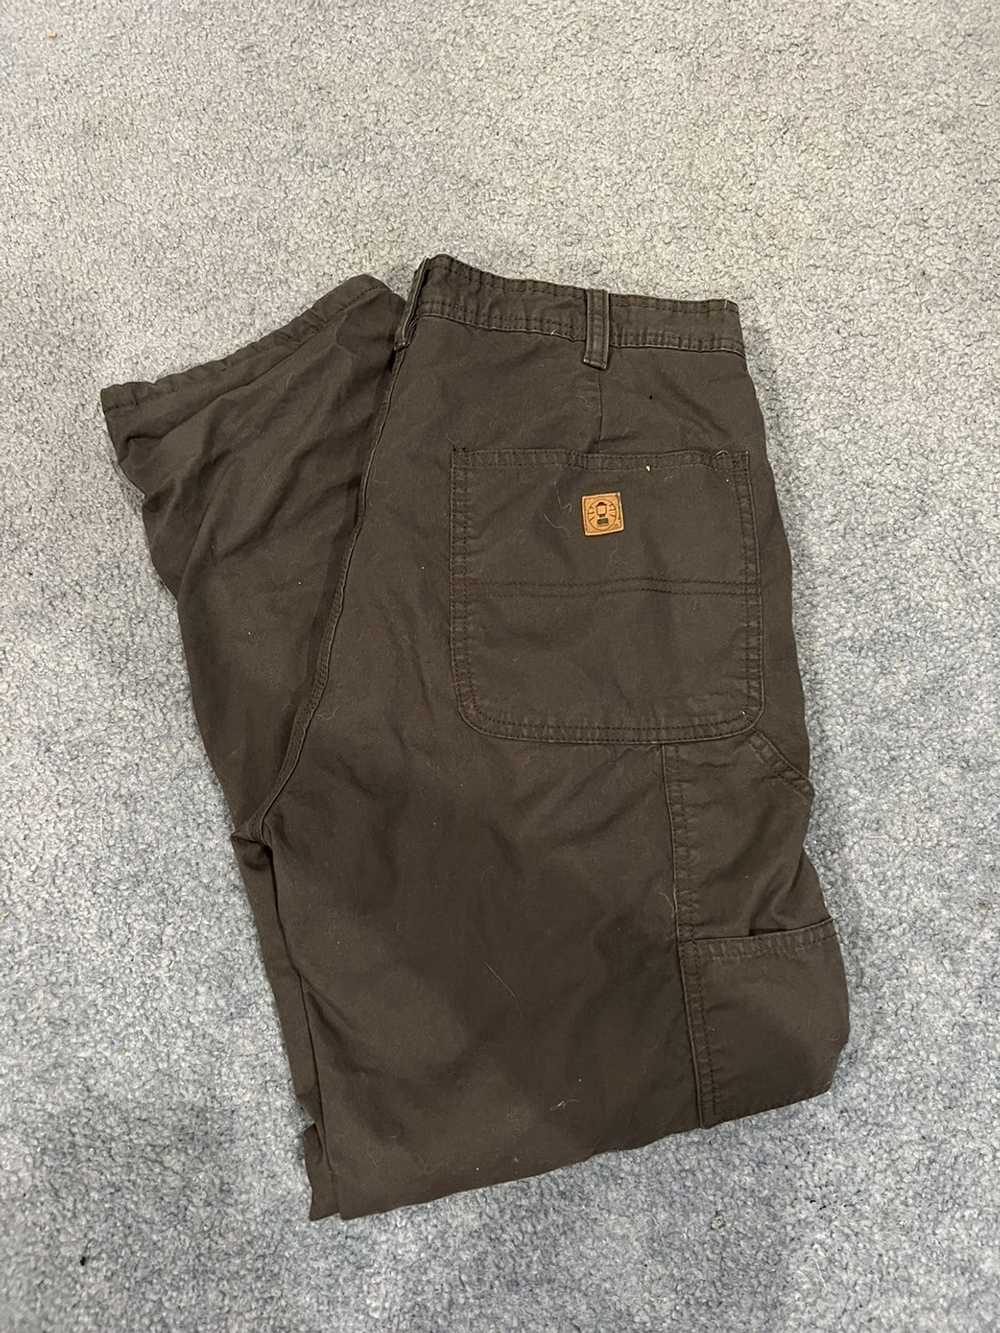 Coleman Coleman 32x30 Insulated Camp Pant - image 3